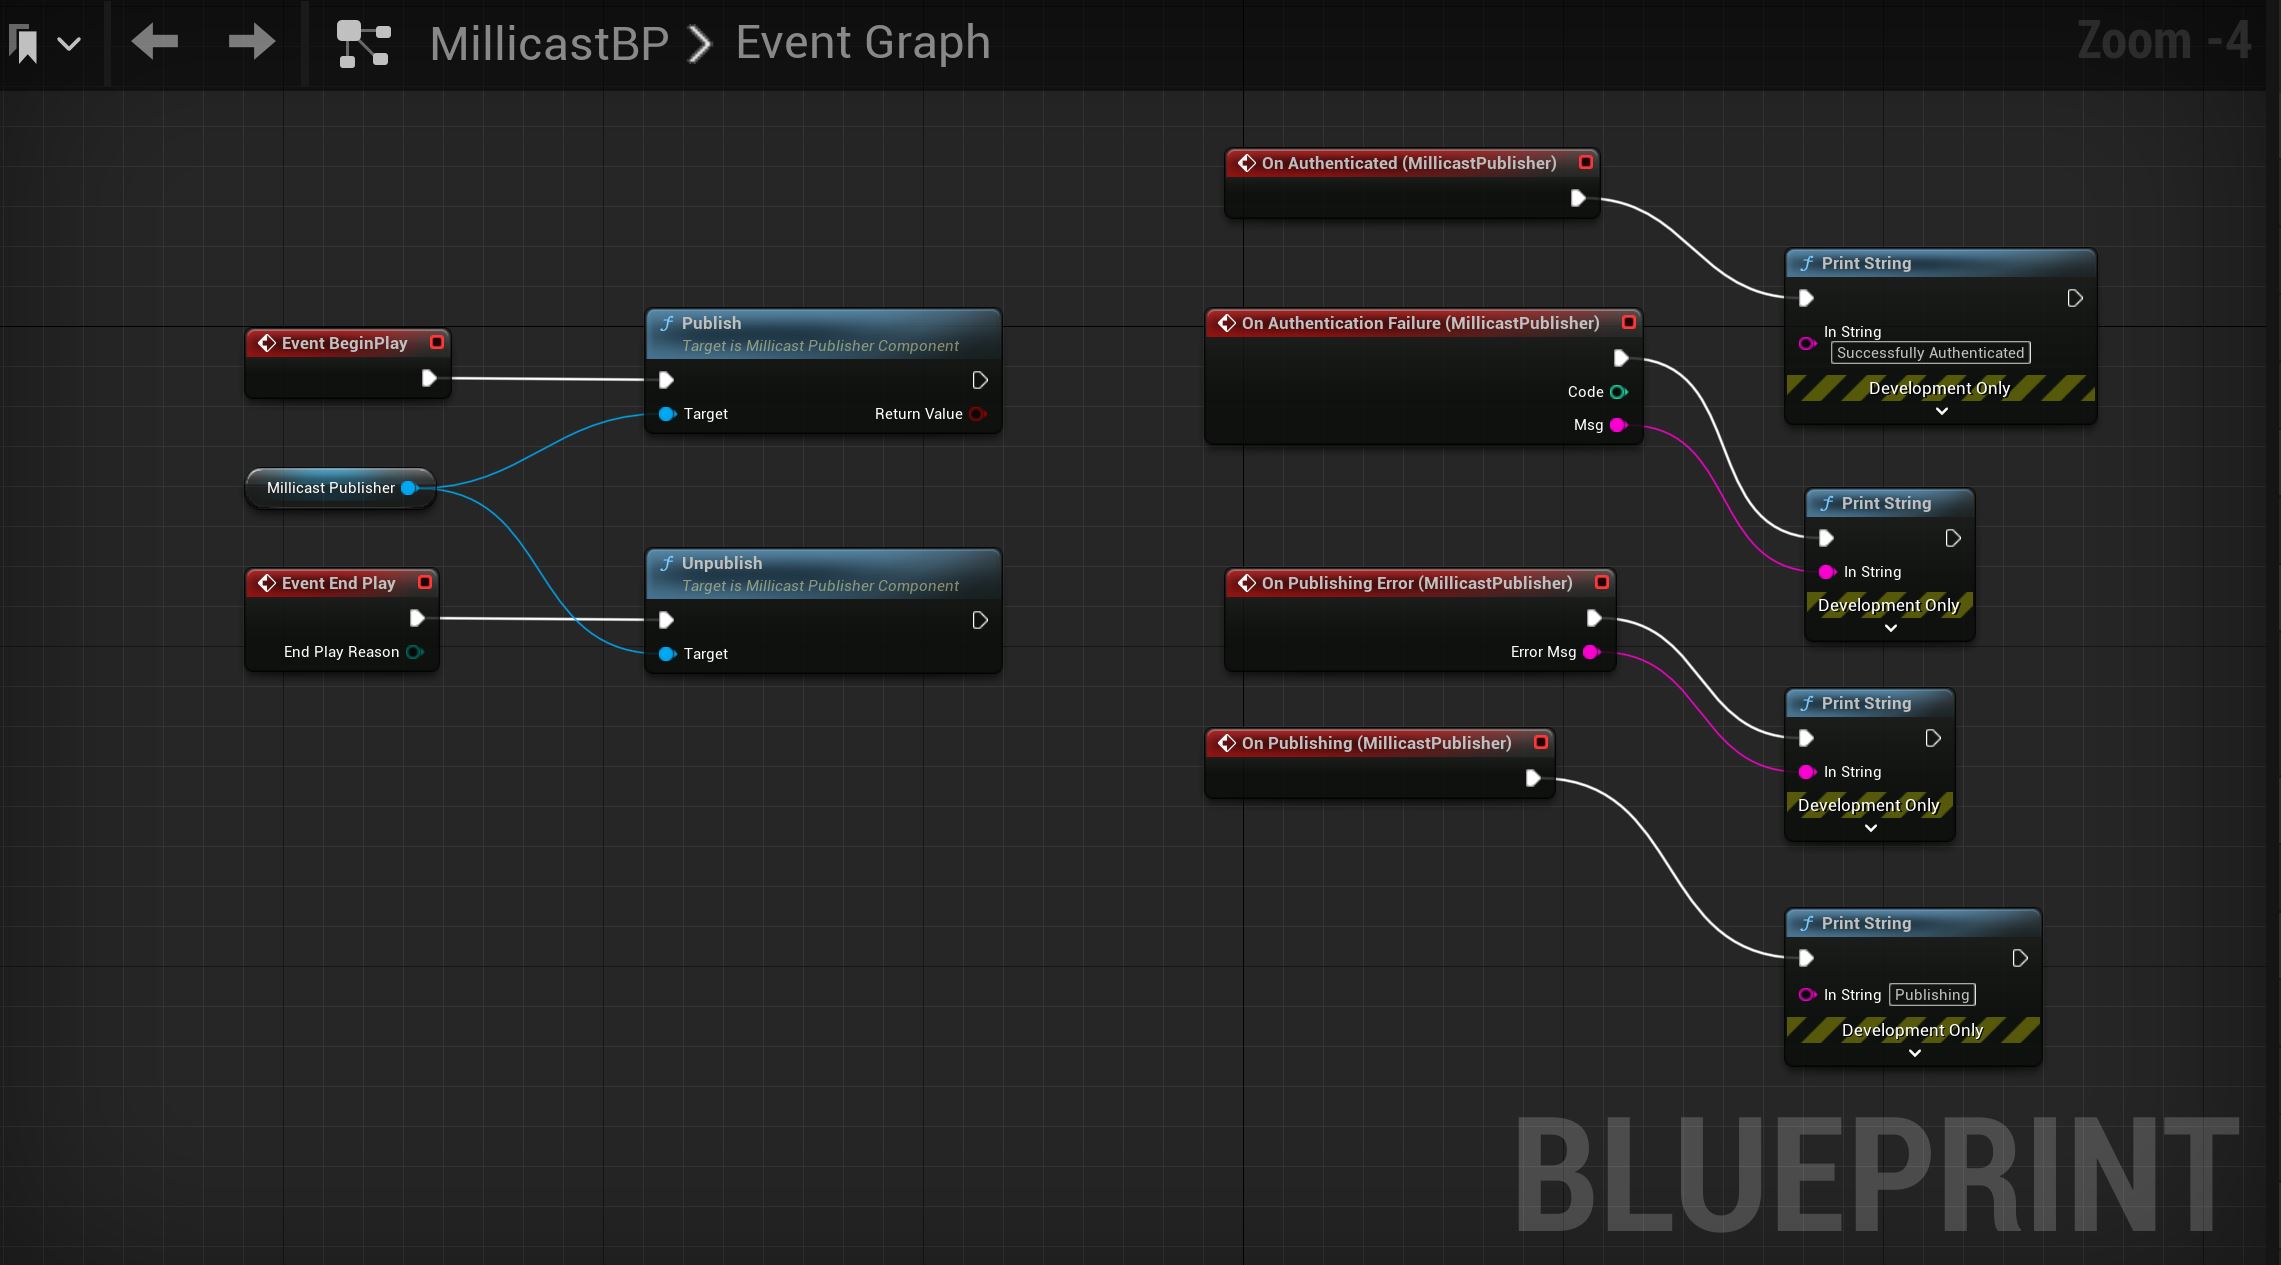 We can add error logging by adding other Dolby.io Streaming Millicast components to the Event Graph blueprint.